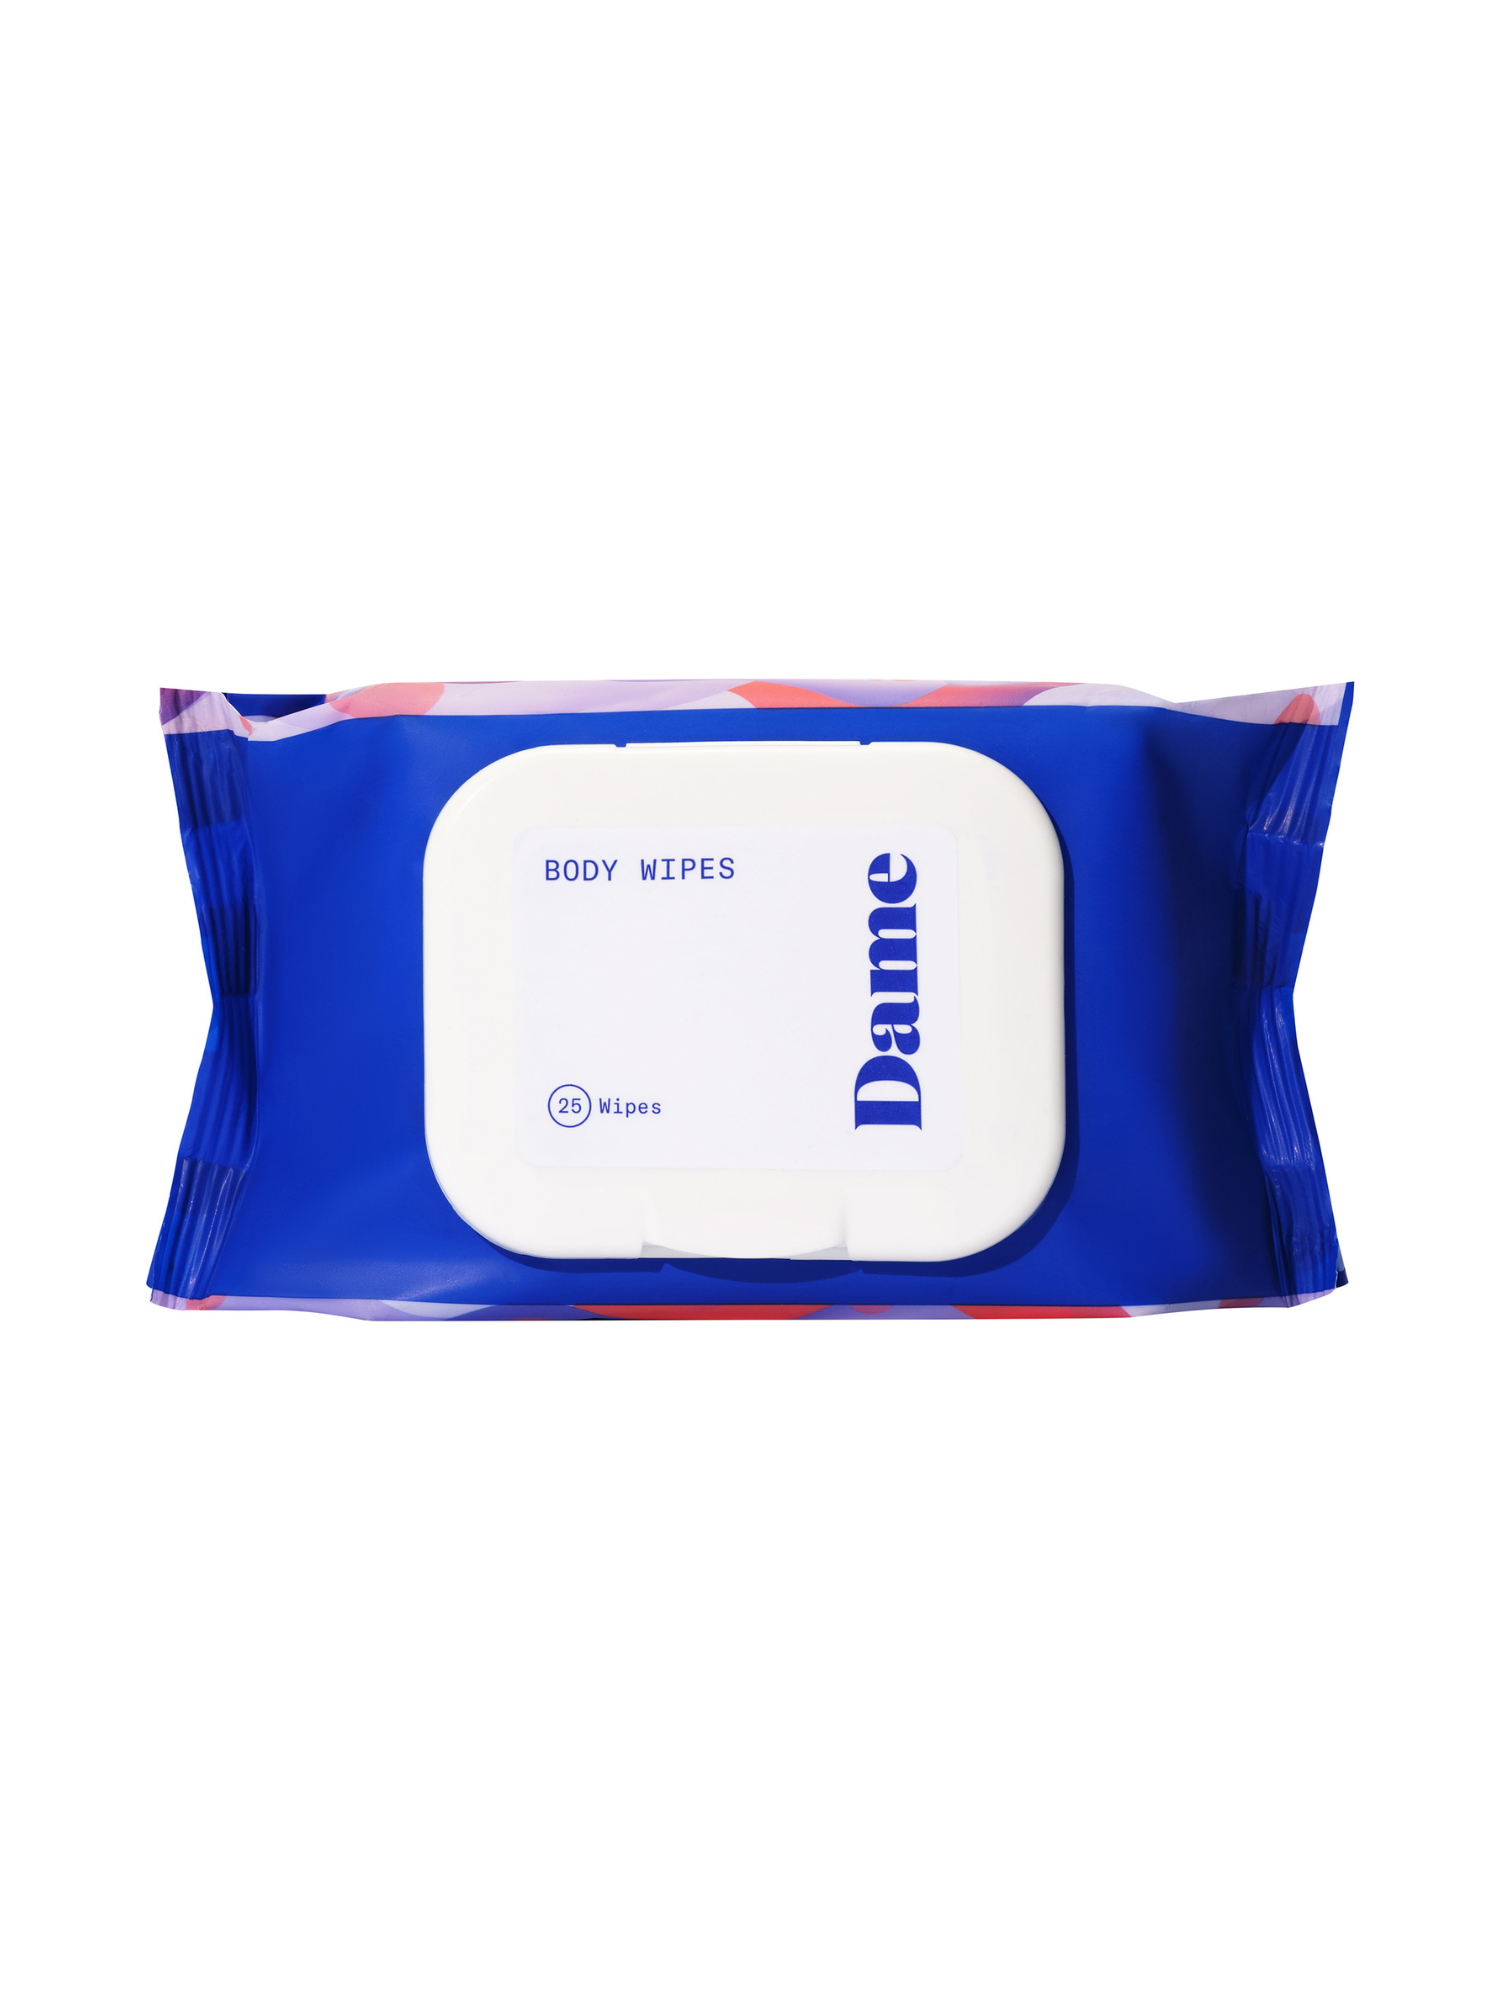 Dame body wipes, body wipes, dame, cleaning, fresh, vaginal, body, Ph, wipes, nourished